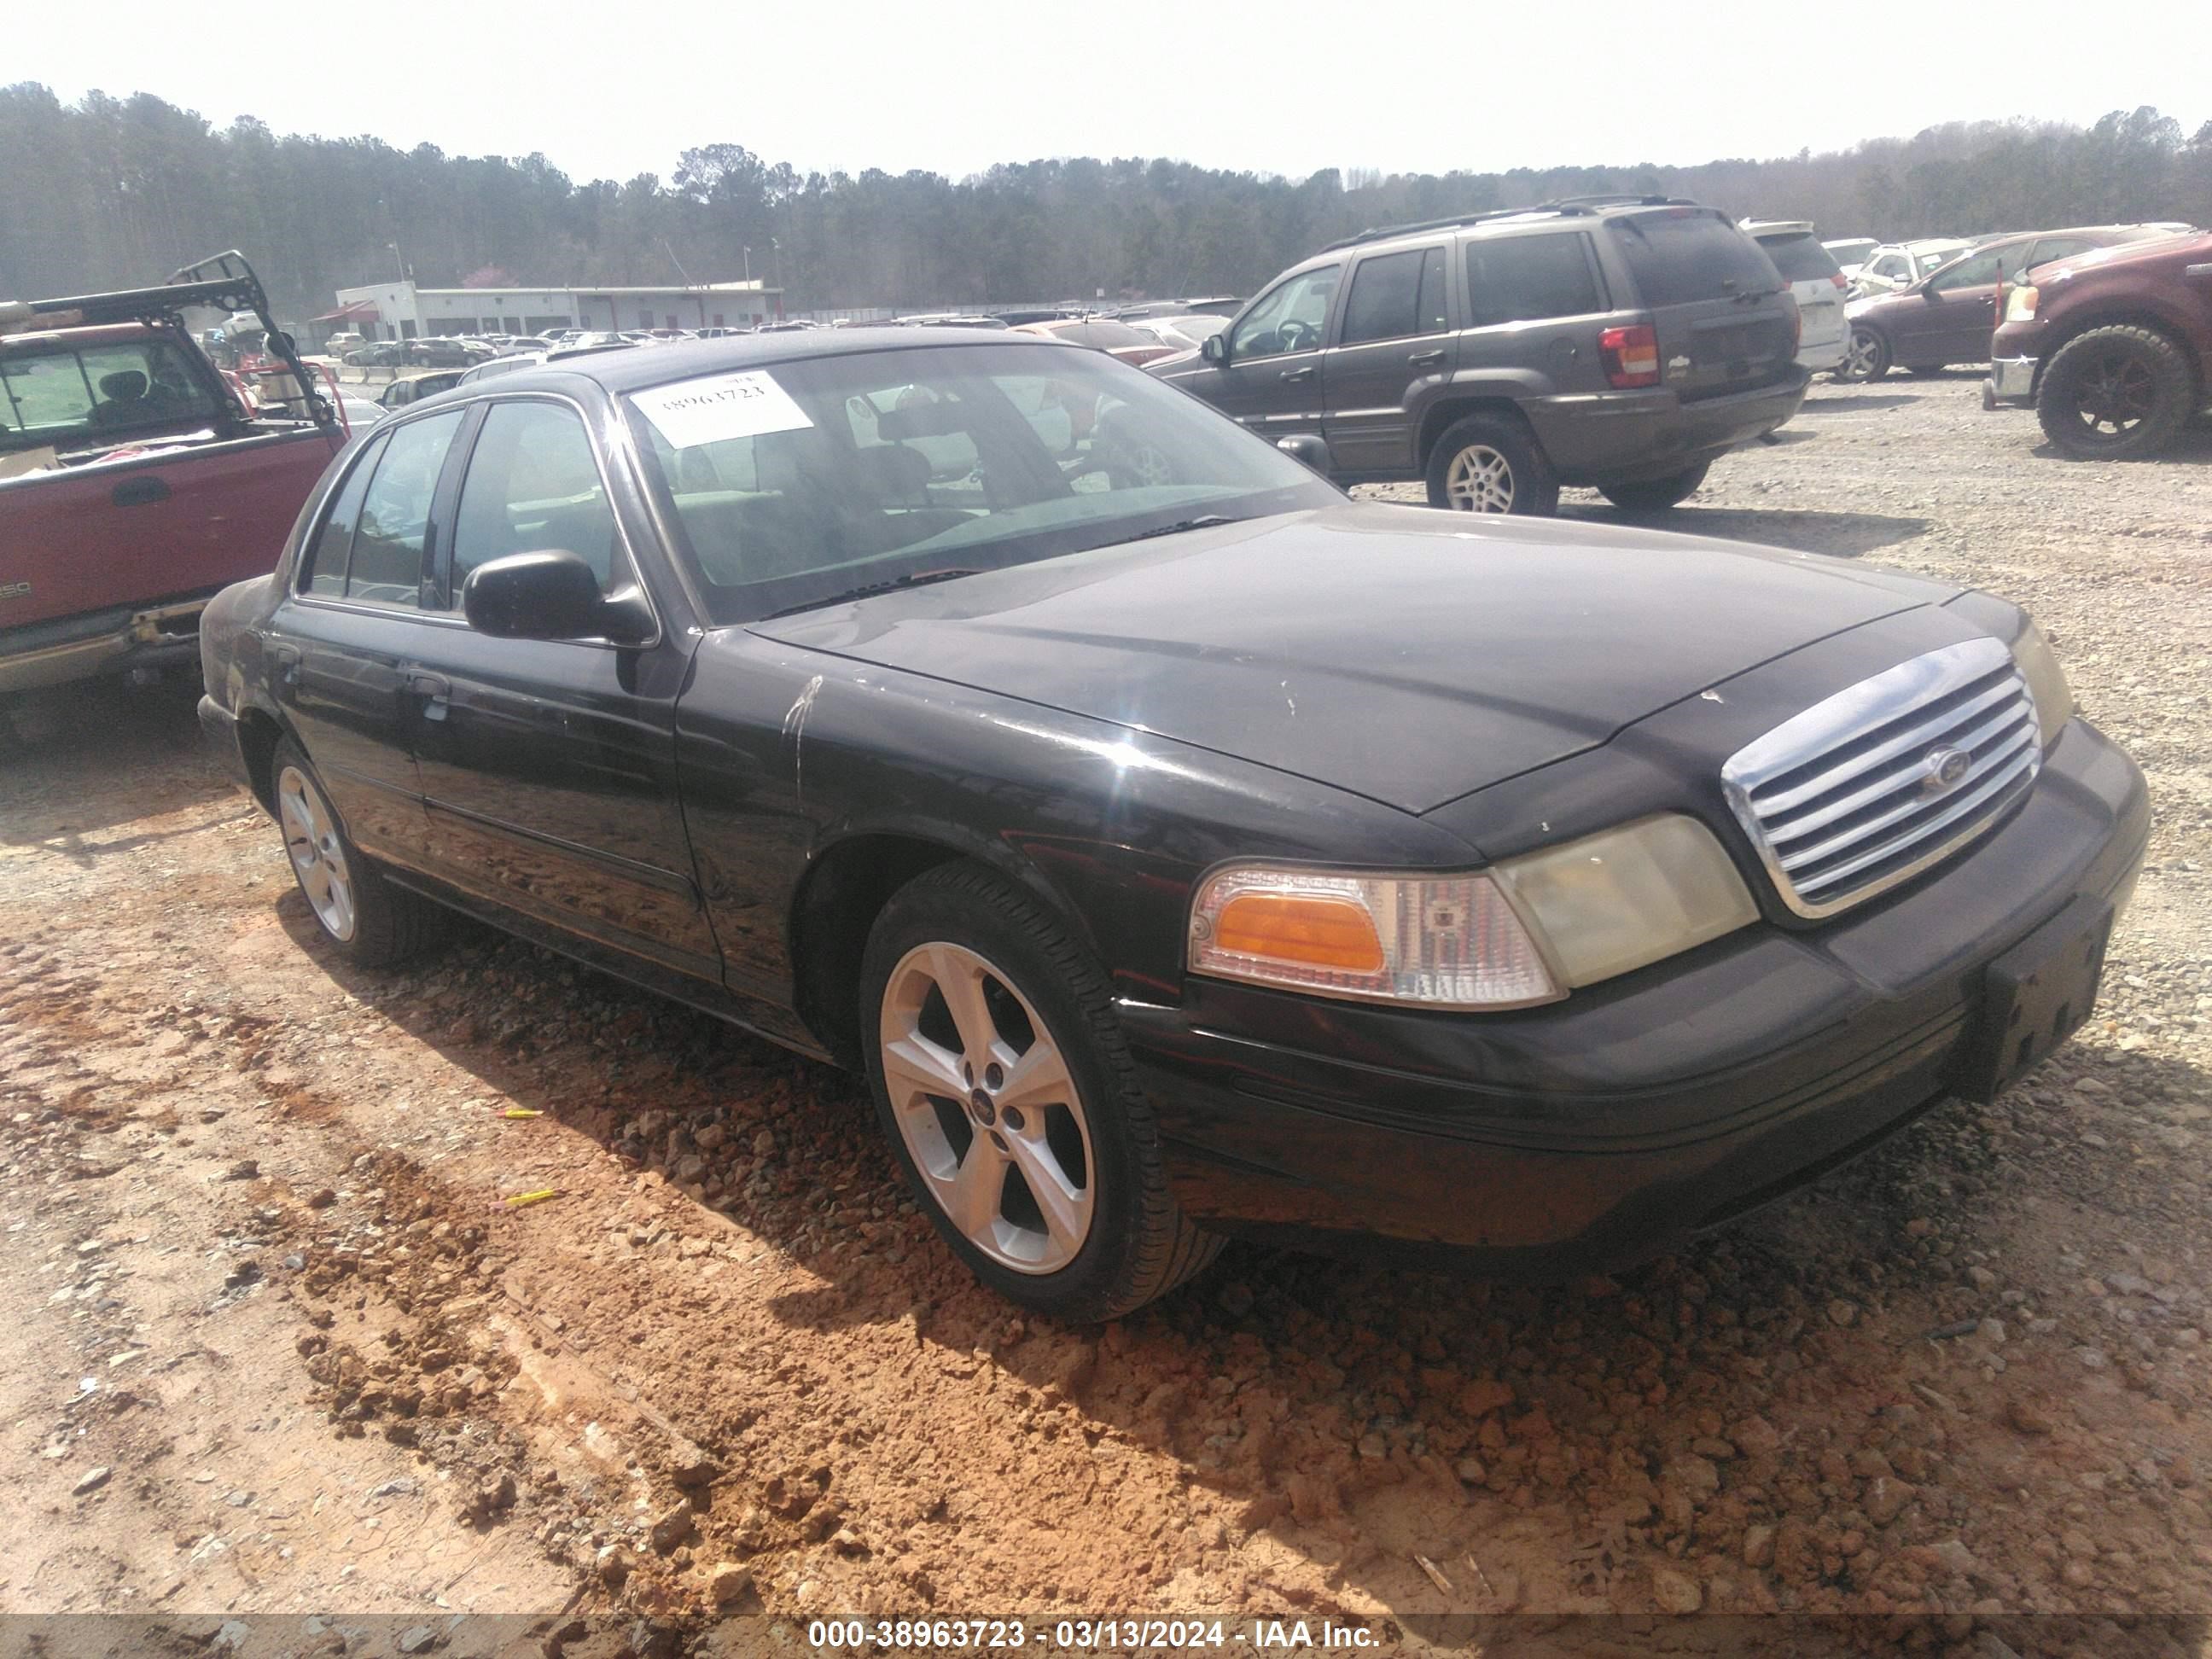 VIN: 2FAFP71WXYX137385 - ford crown victoria